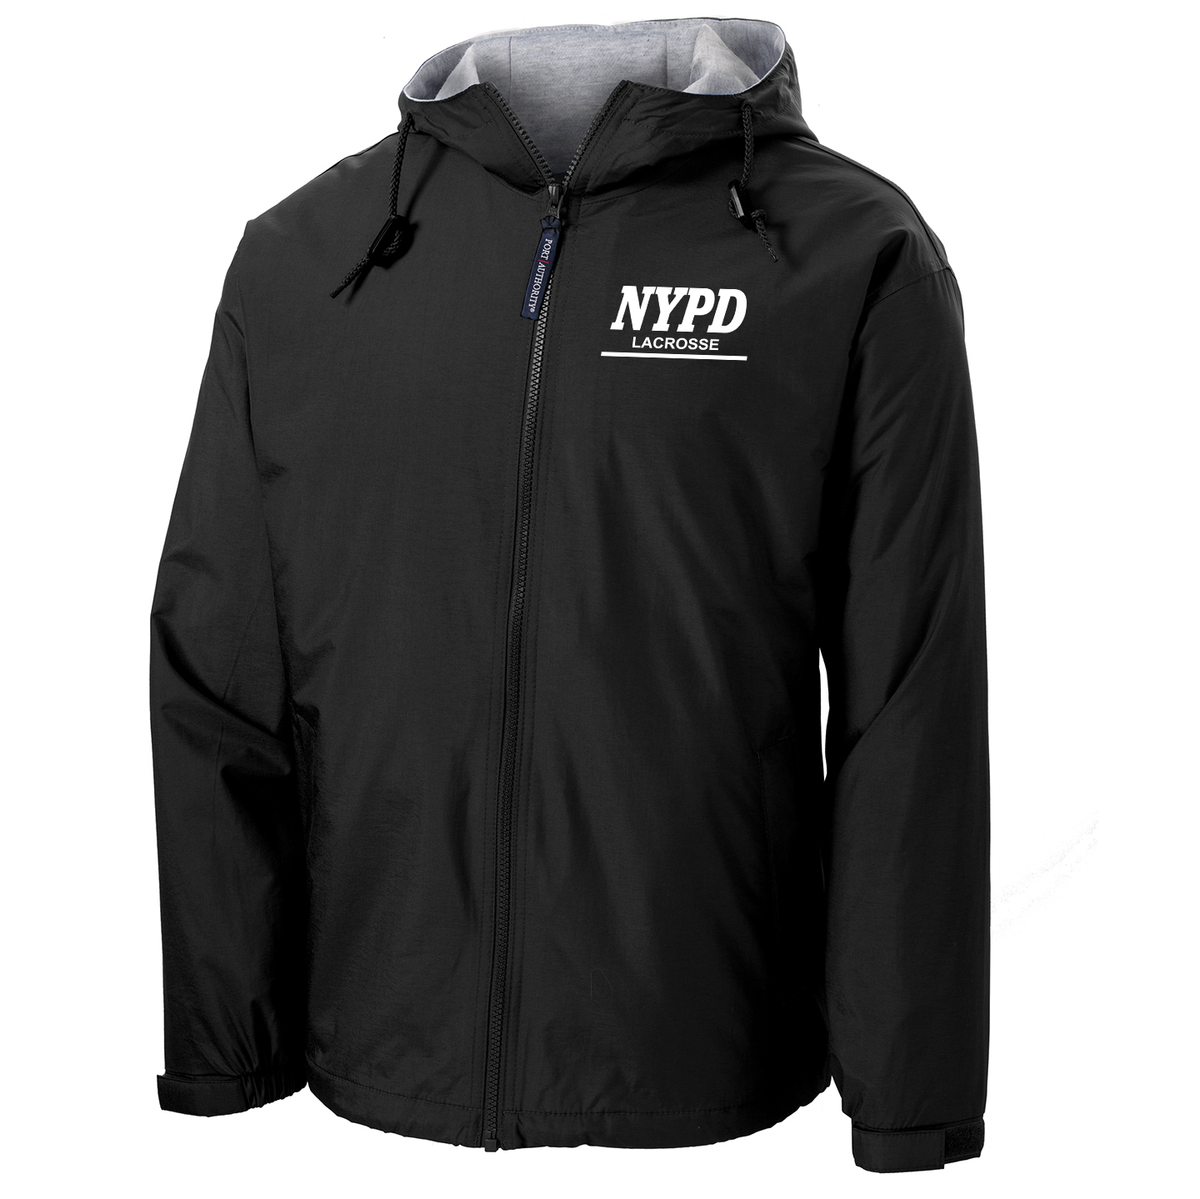 NYPD Lacrosse Hooded Jacket